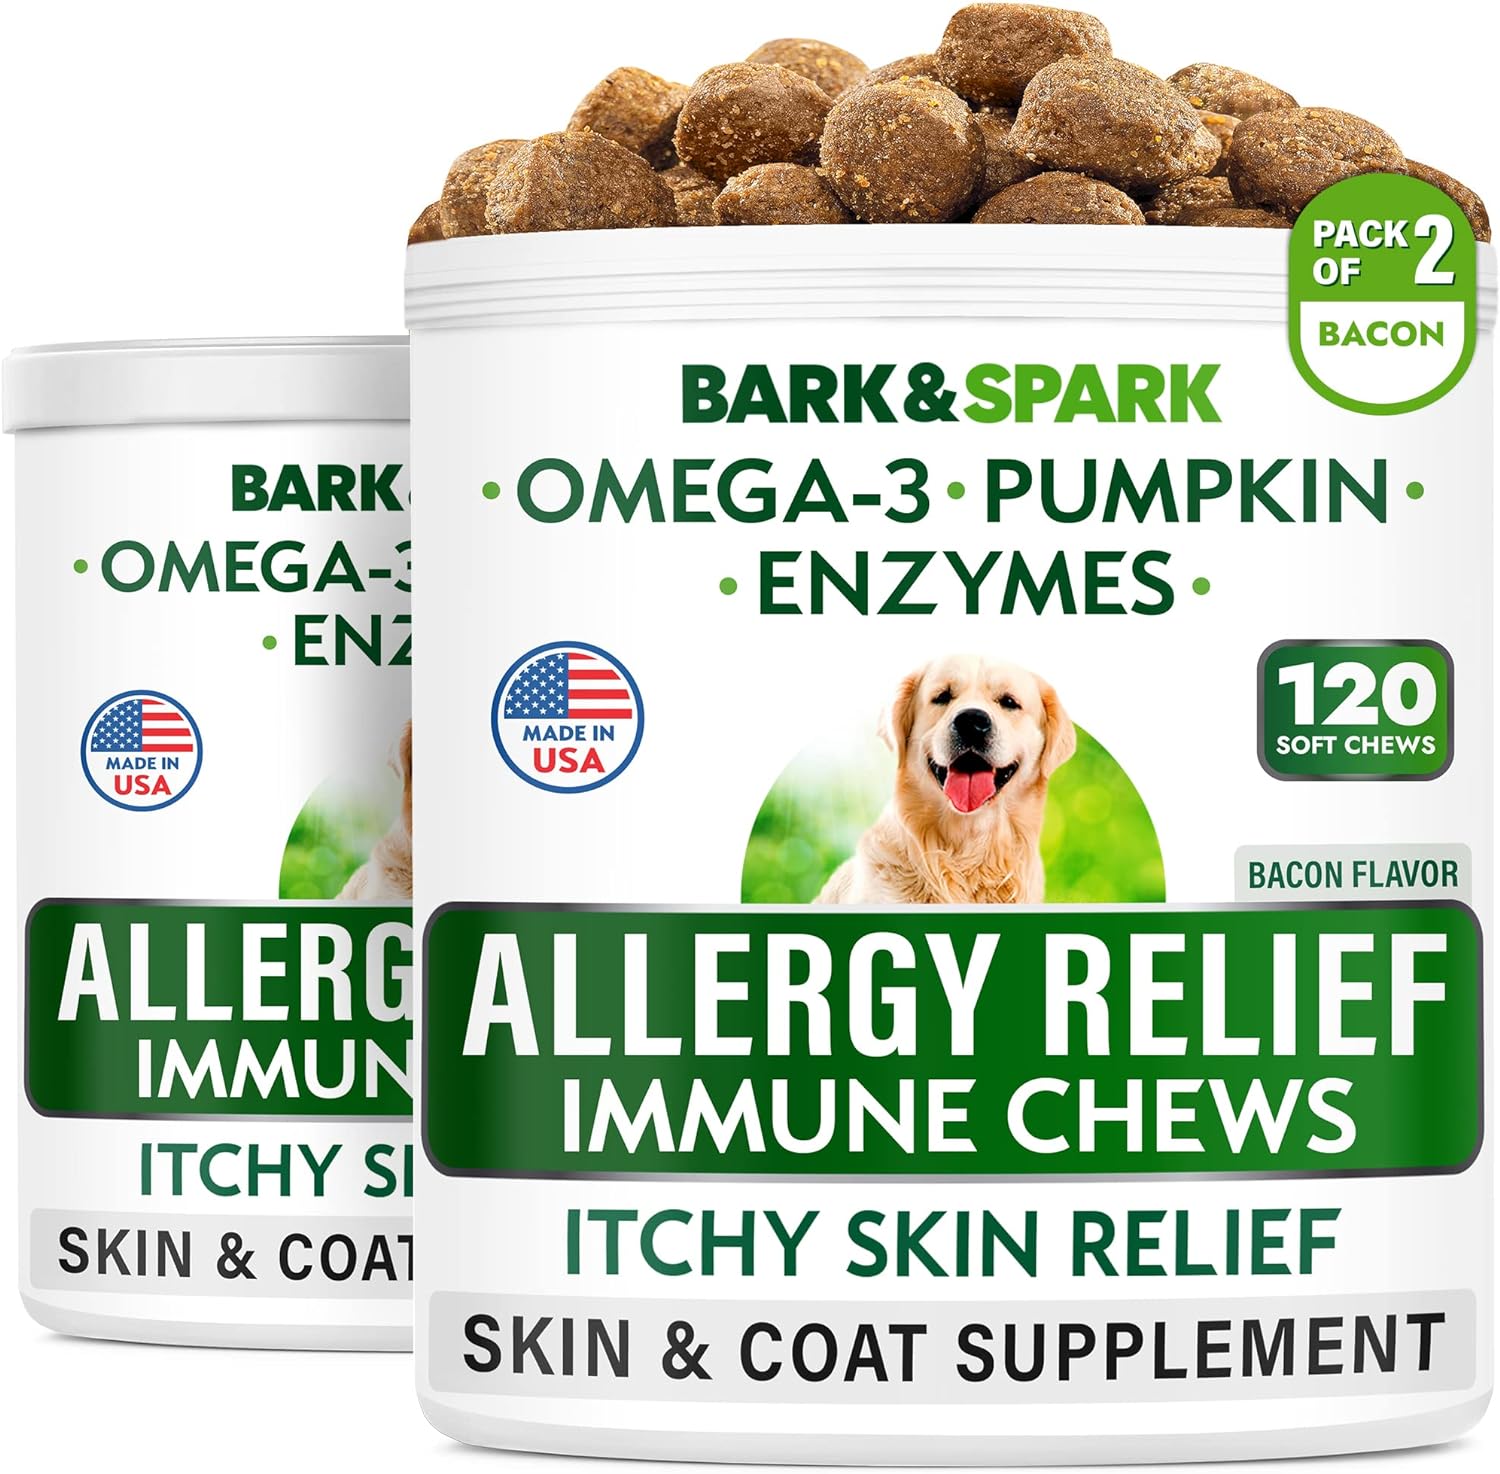 BARK&SPARK Dog Allergy Relief Chews (240 Immune Treats) - Anti-Itch Skin & Coat Supplement - Omega 3 Fish Oil - Itchy Skin Relief Treatment Pills - Itching & Paw Licking - Dry Skin & Hot Spots - Bacon